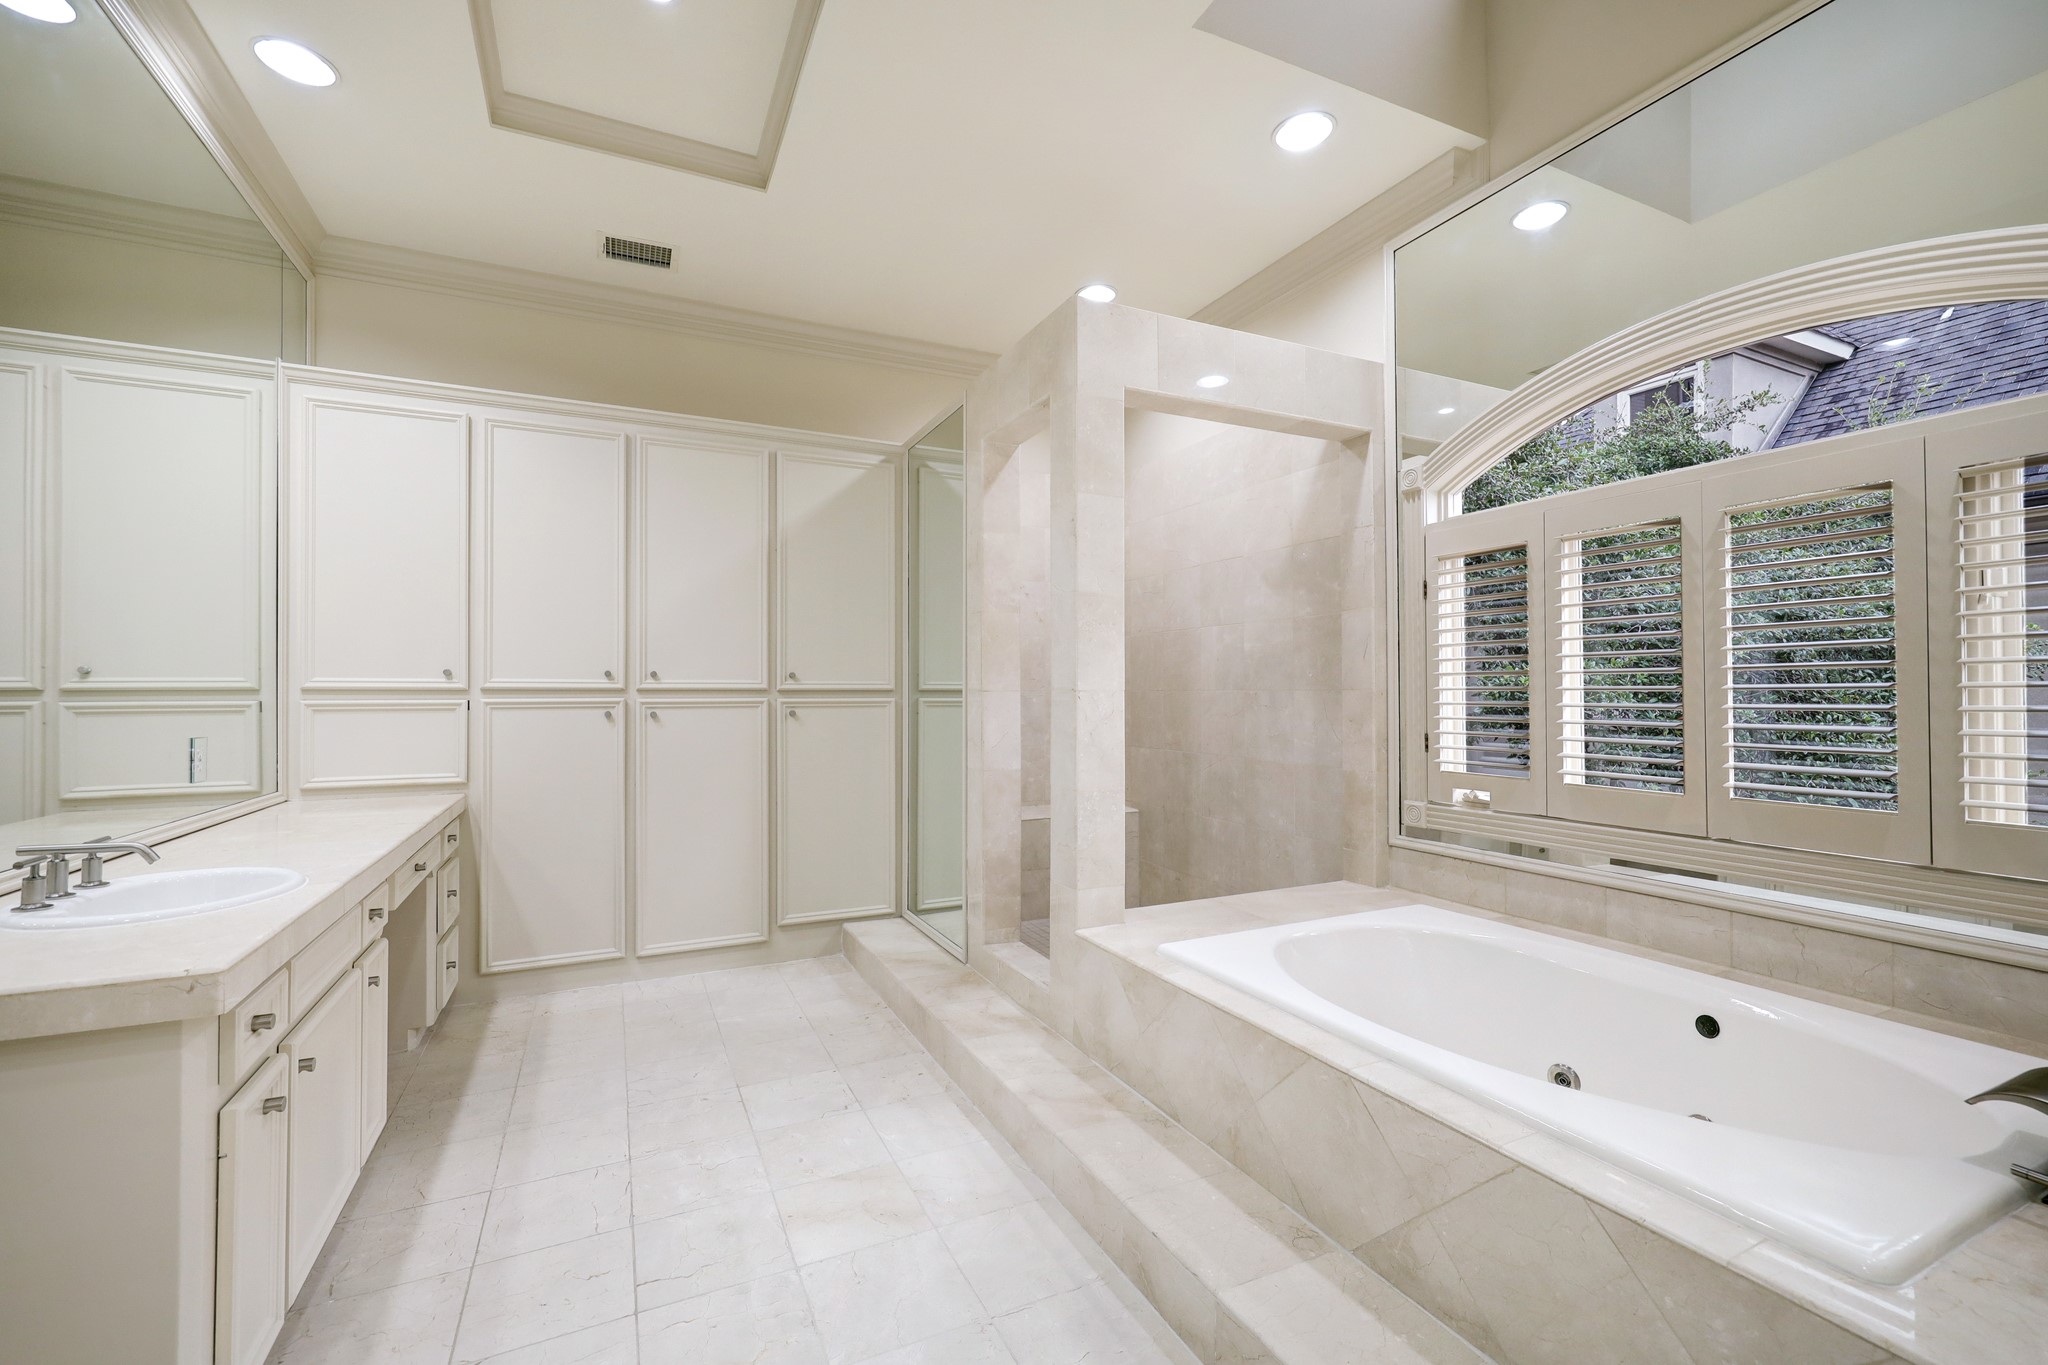 The primary bath offers a relaxing jacuzzi tub and large walk-in shower.